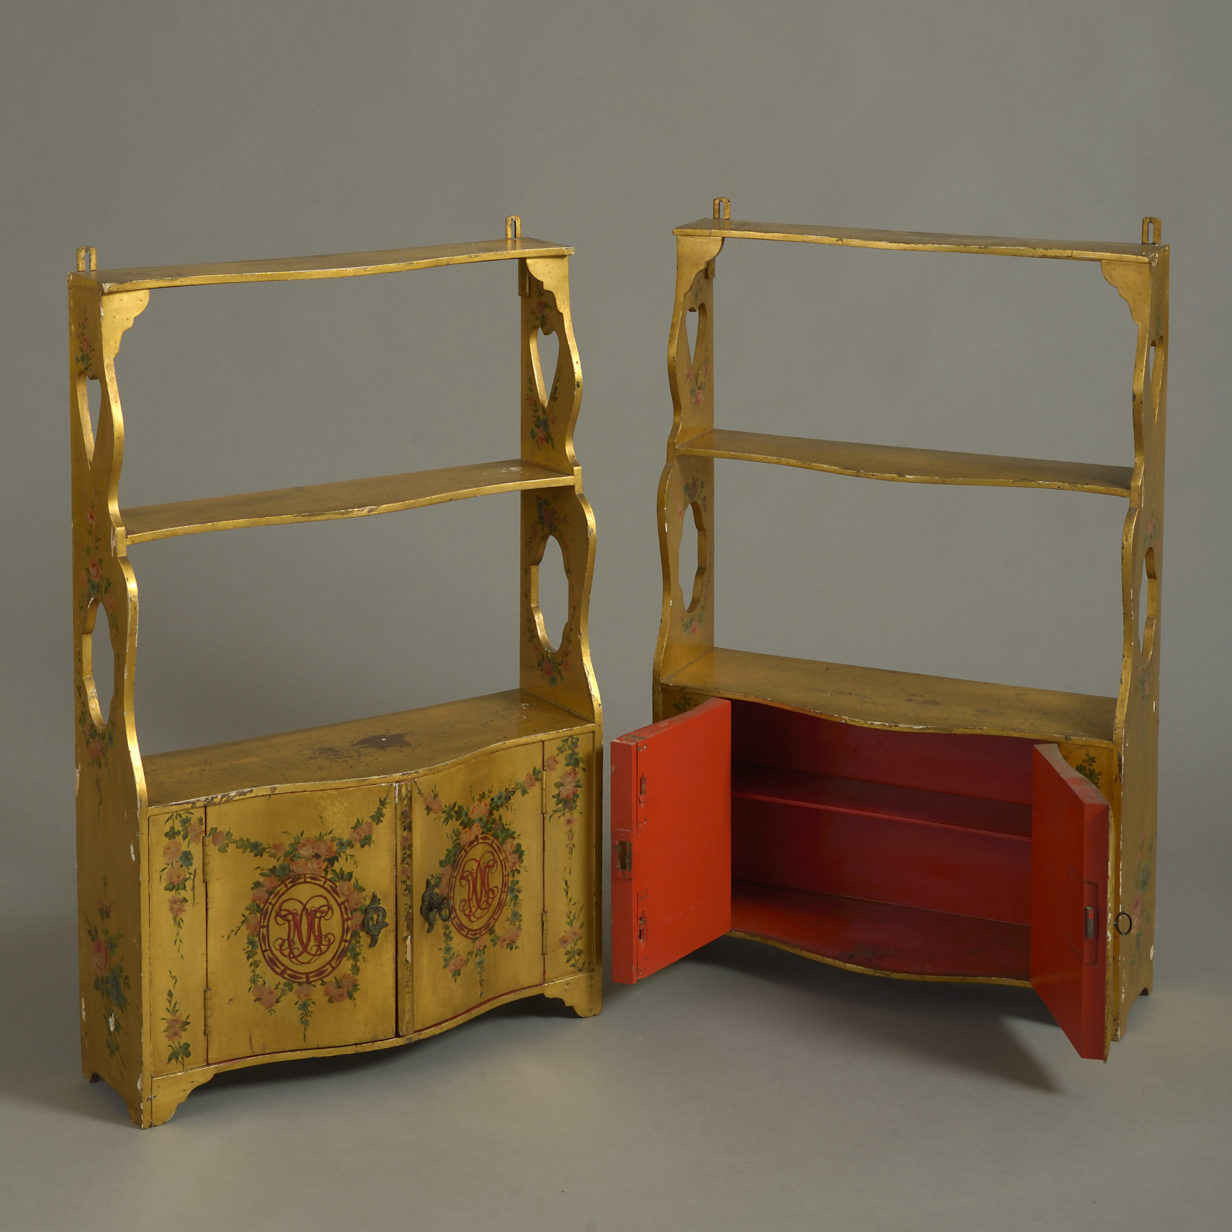 Pair of 18th century yellow painted hanging shelves